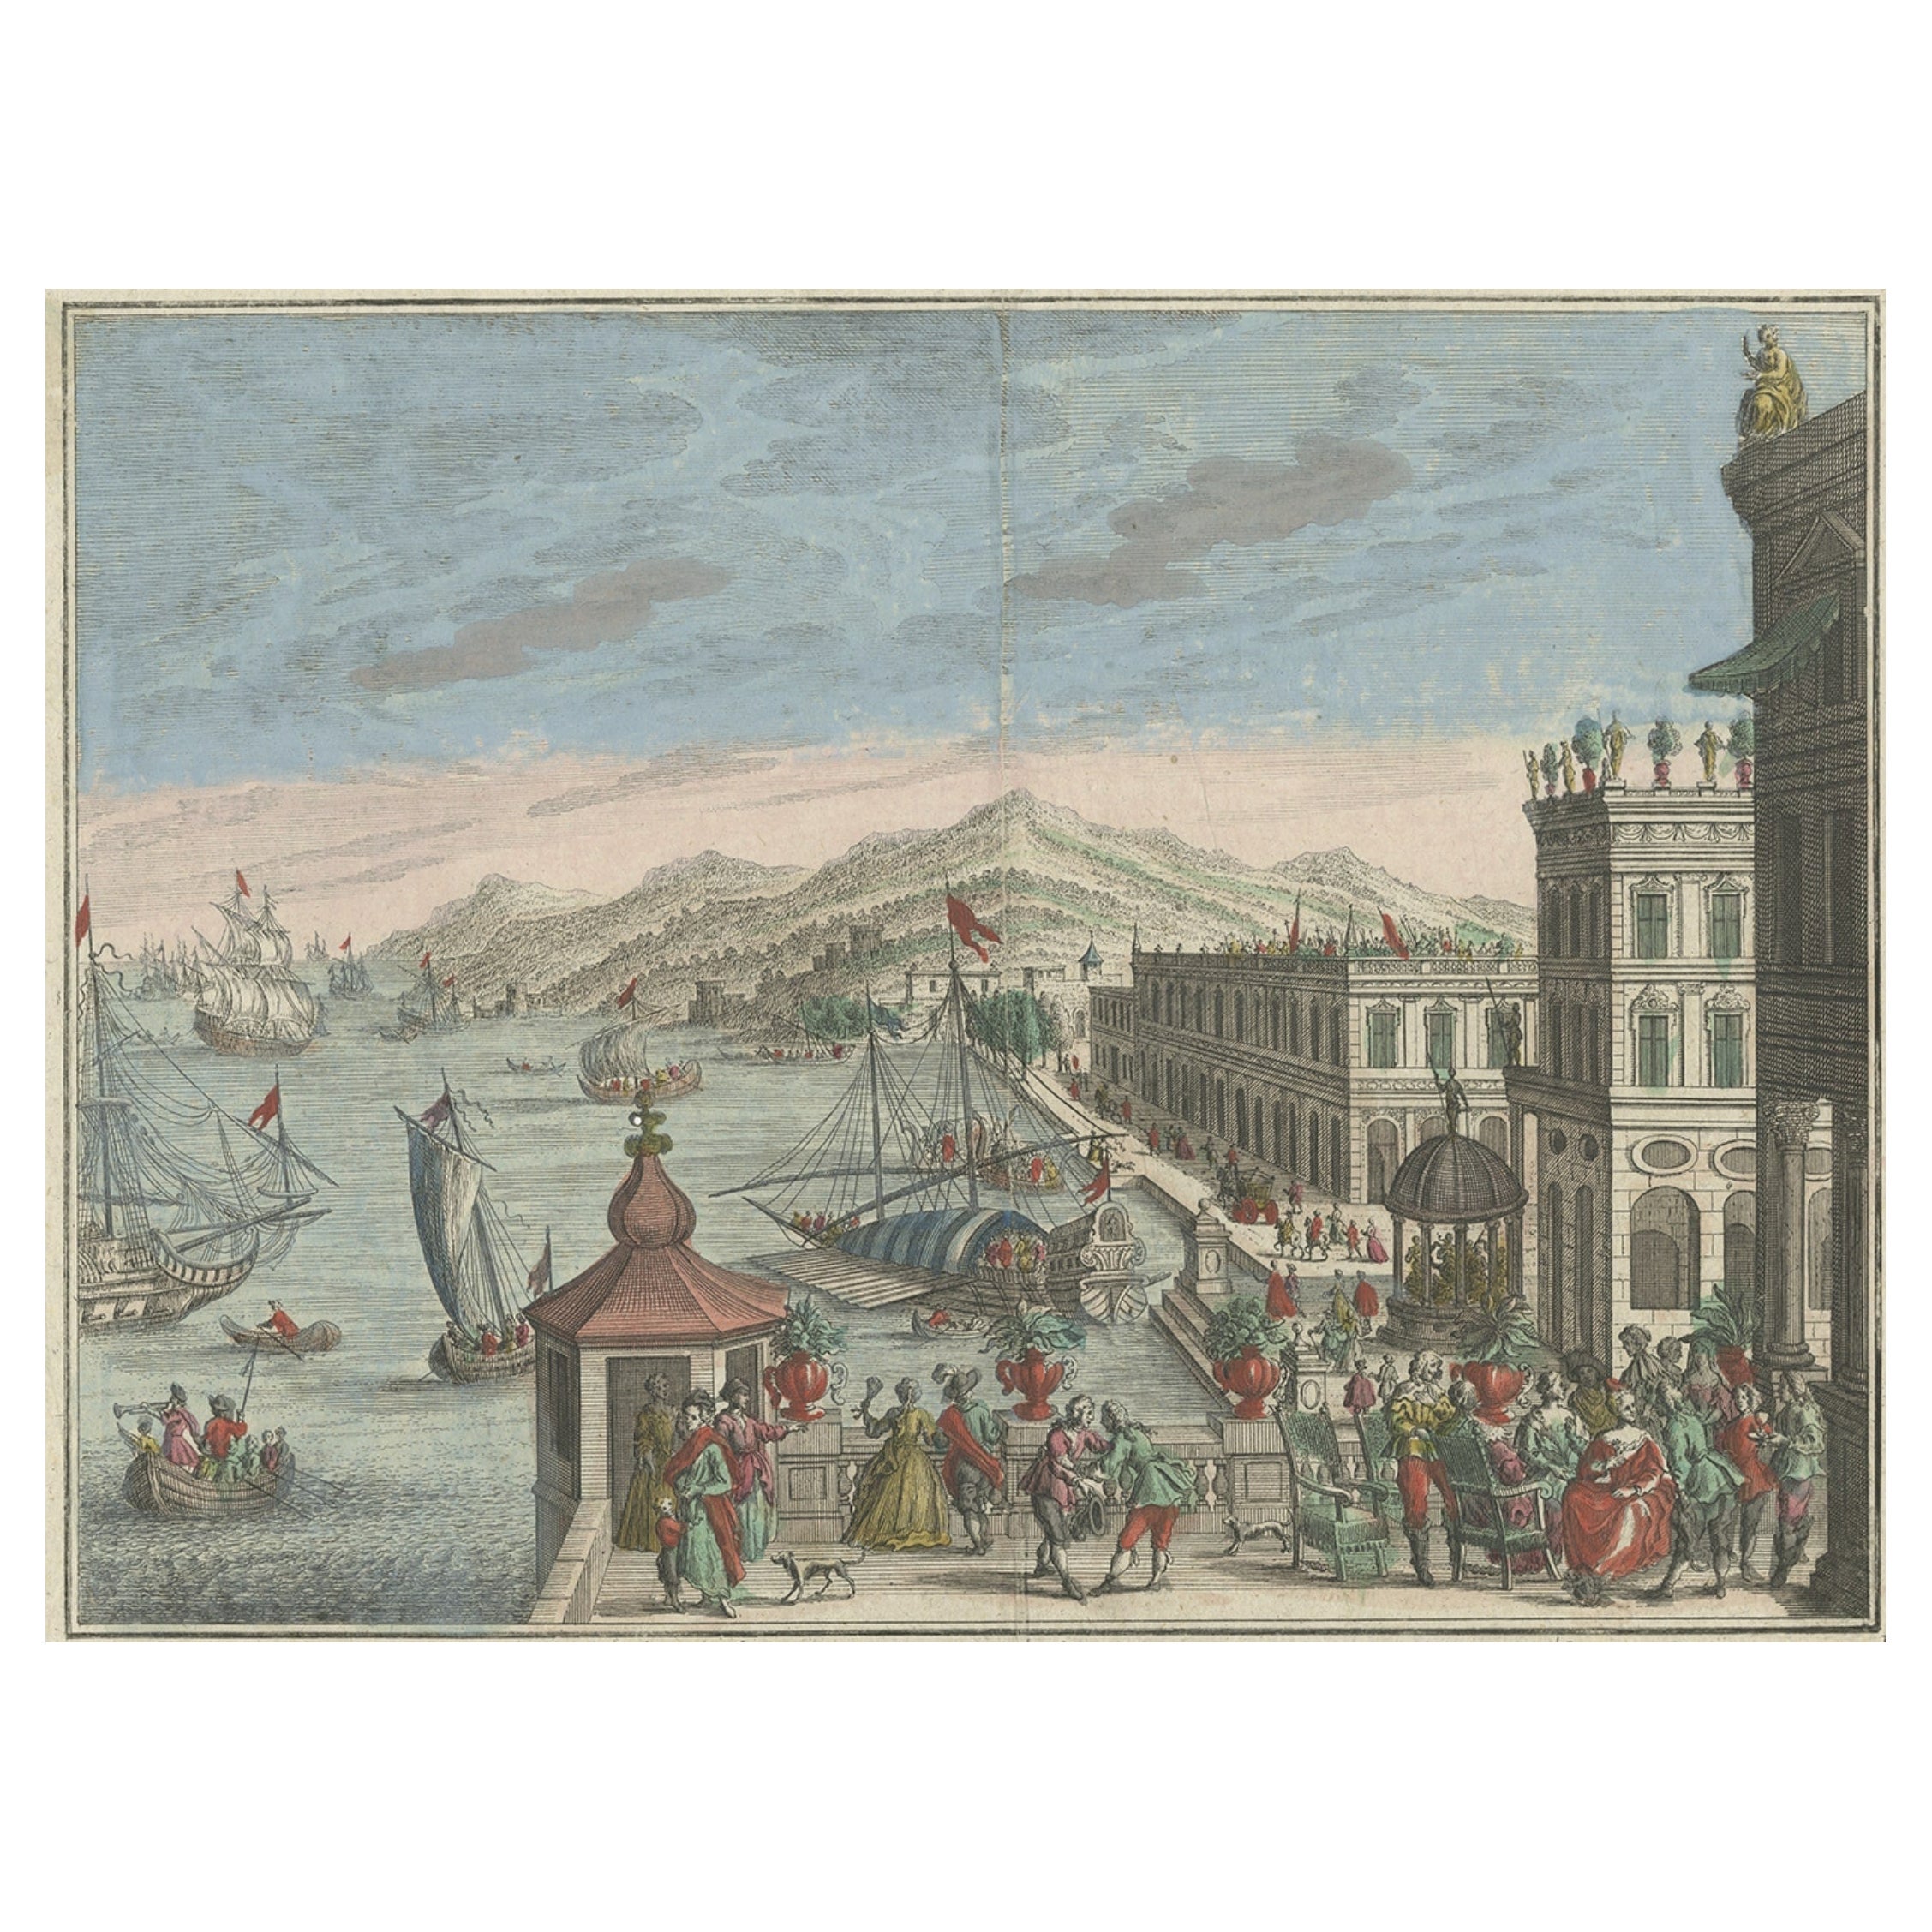 Decorative Handcolored Antique Print of an Outdoor Banquet Near a Port, c.1750